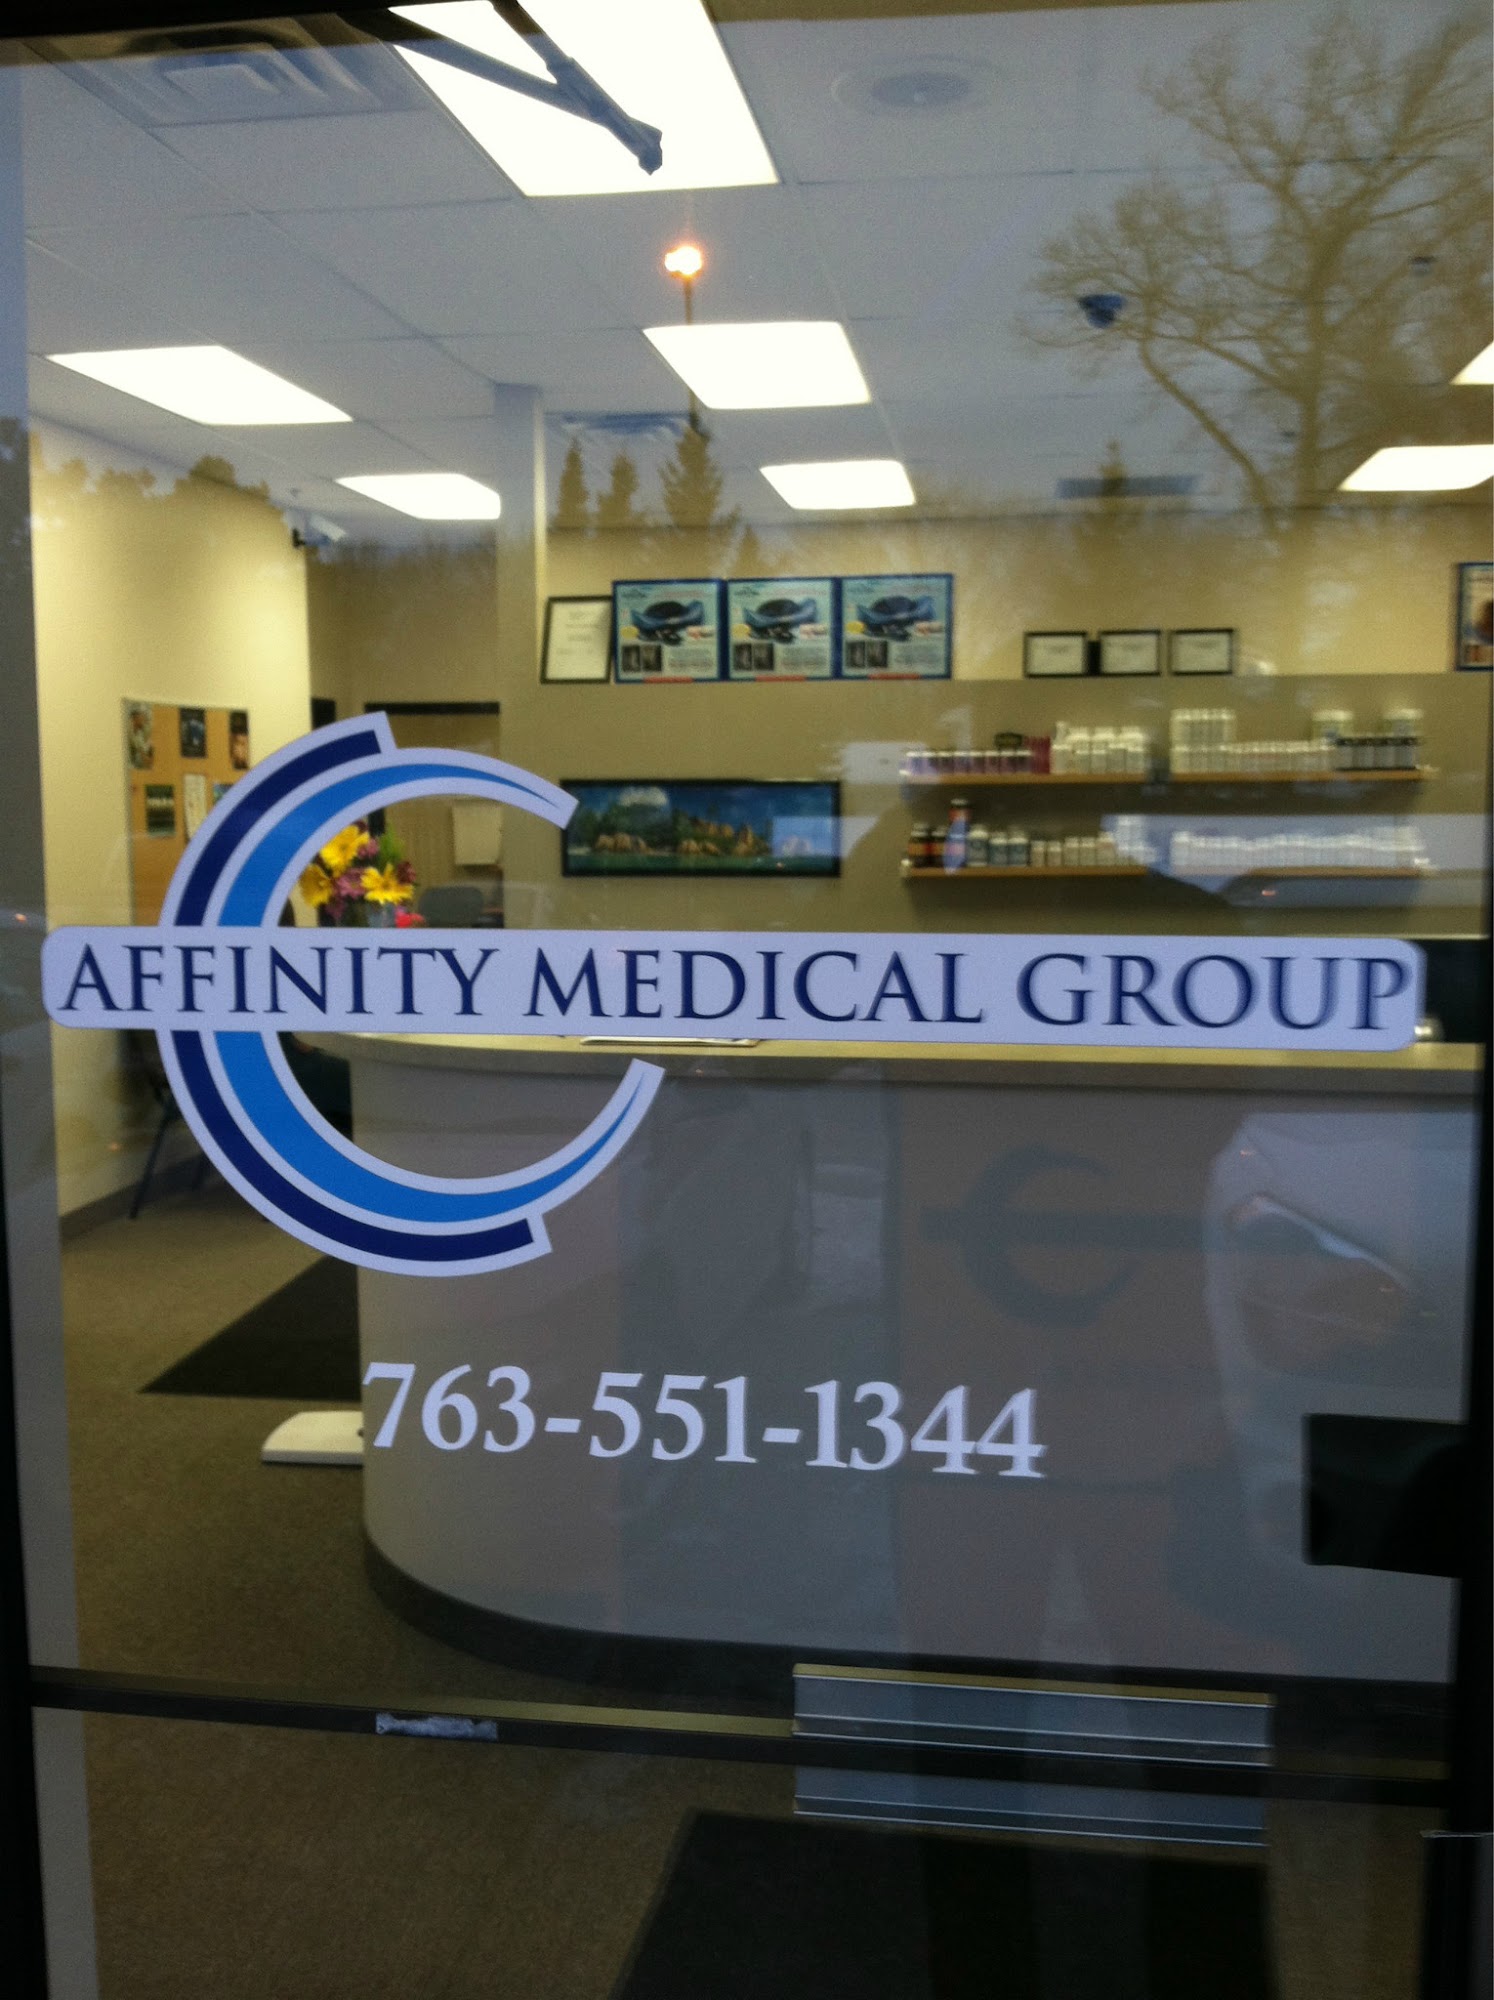 Affinity Medical Group 9446 36th Ave N, New Hope Minnesota 55427